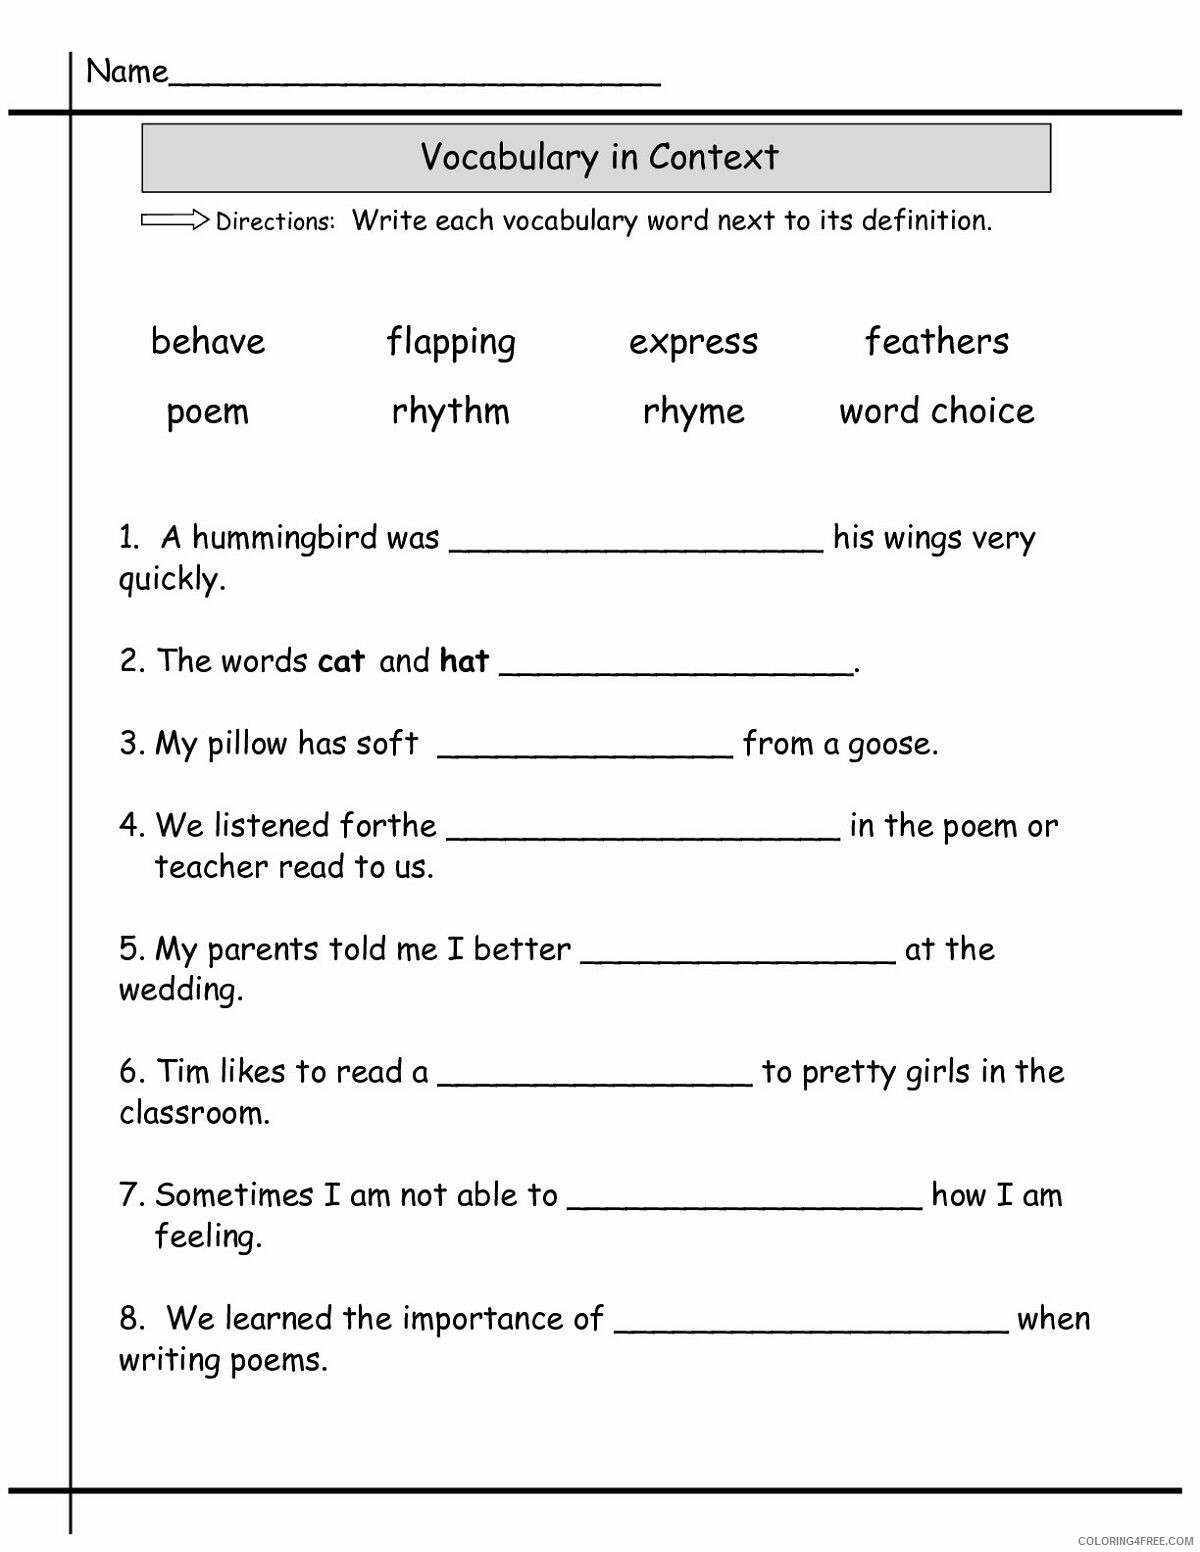 2nd Grade Coloring Pages Educational English Worksheets Vocabulary 2020 0129 Coloring4free